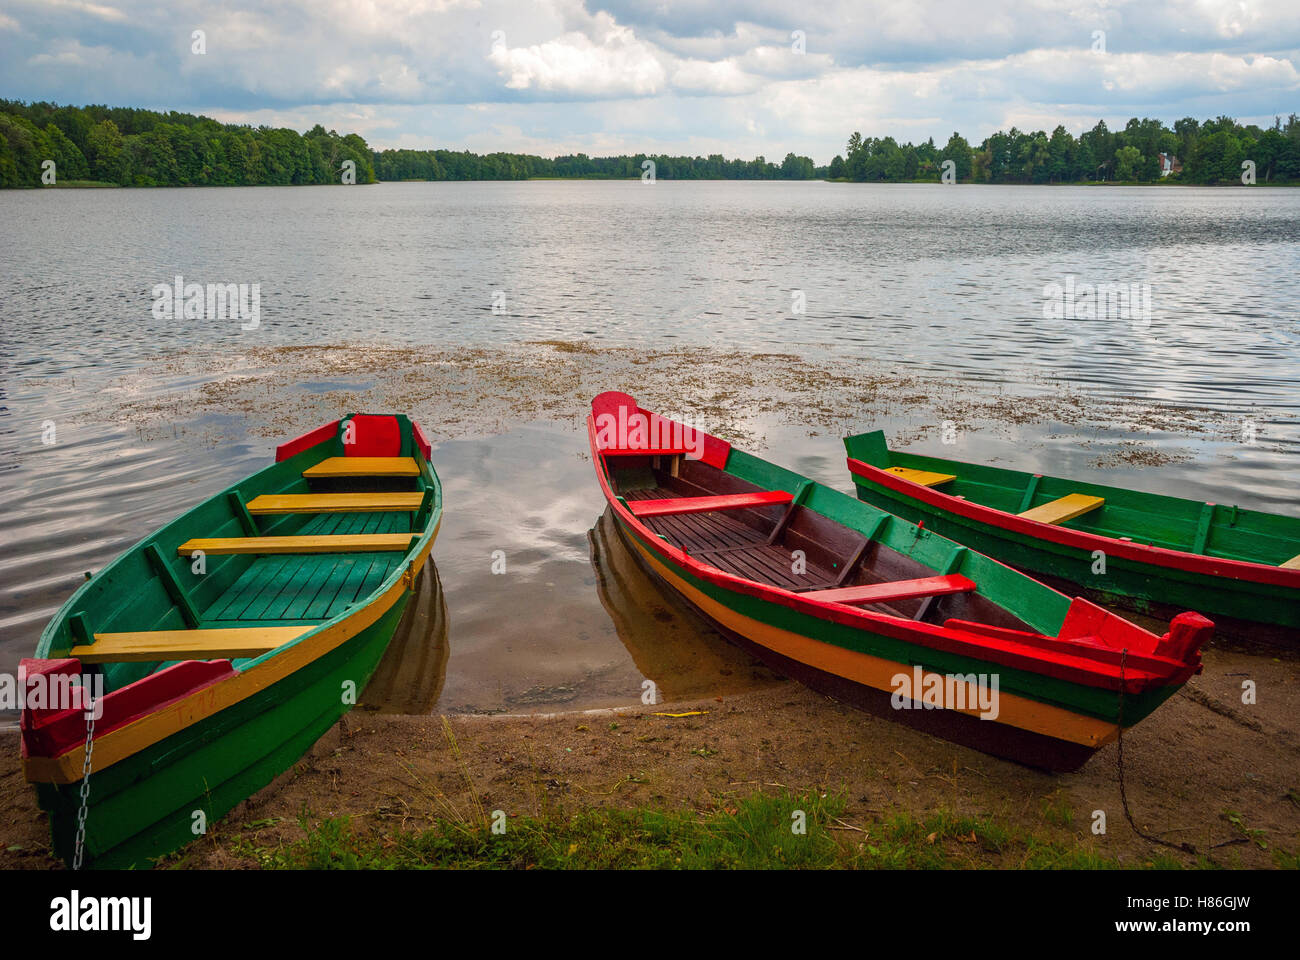 Boats by the lake in lithuanian colors, Trakai, Lithuania Stock Photo